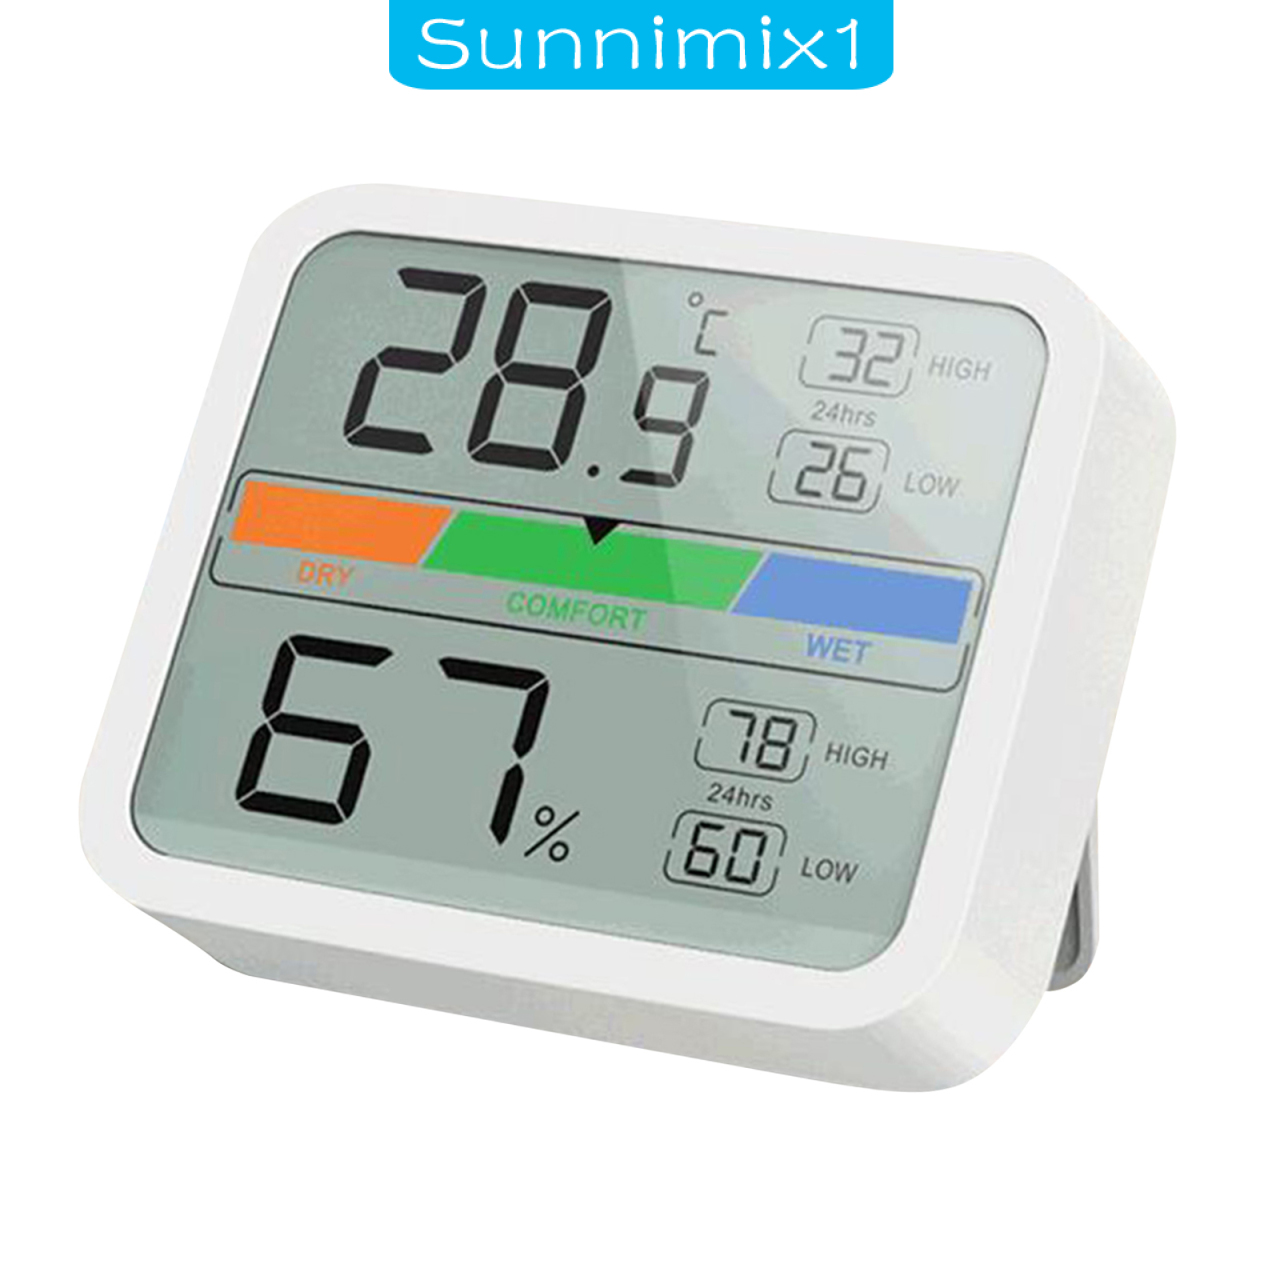 [SUNNIMIX1]Digital LCD Thermometer Hygrometer Humidity Temperature Meter for Basement